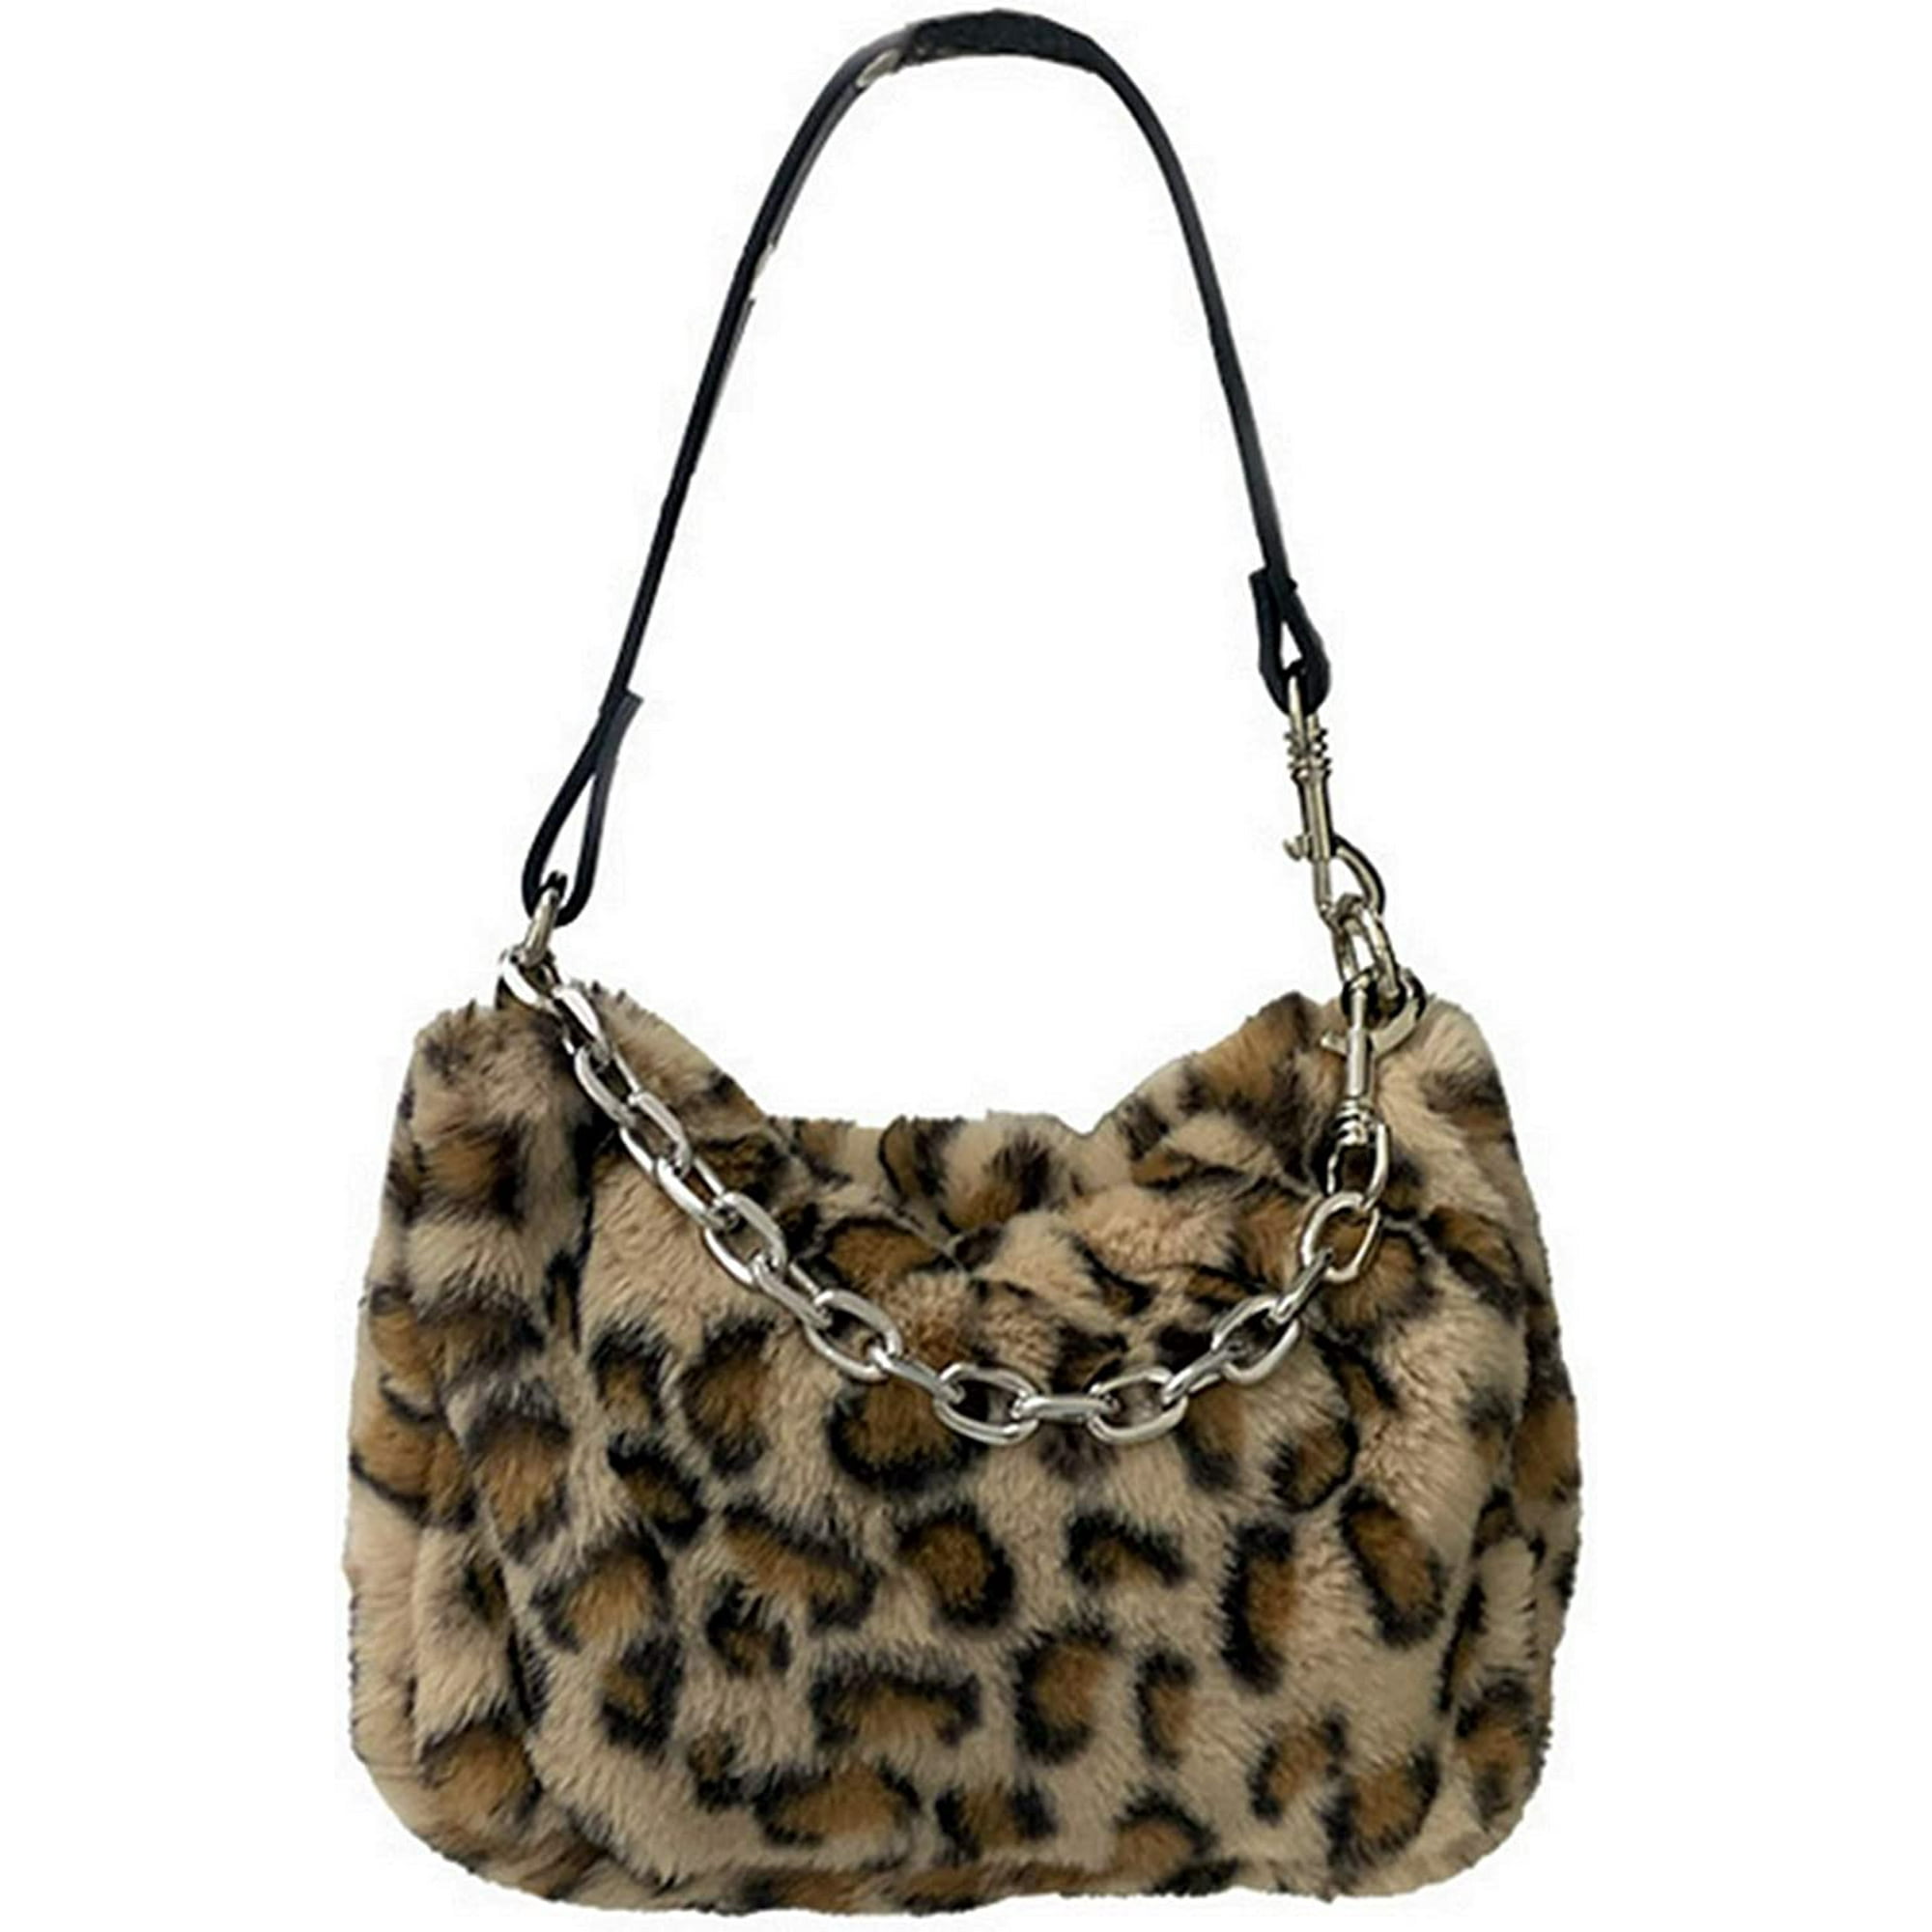 Cow print tote bag with removable strap